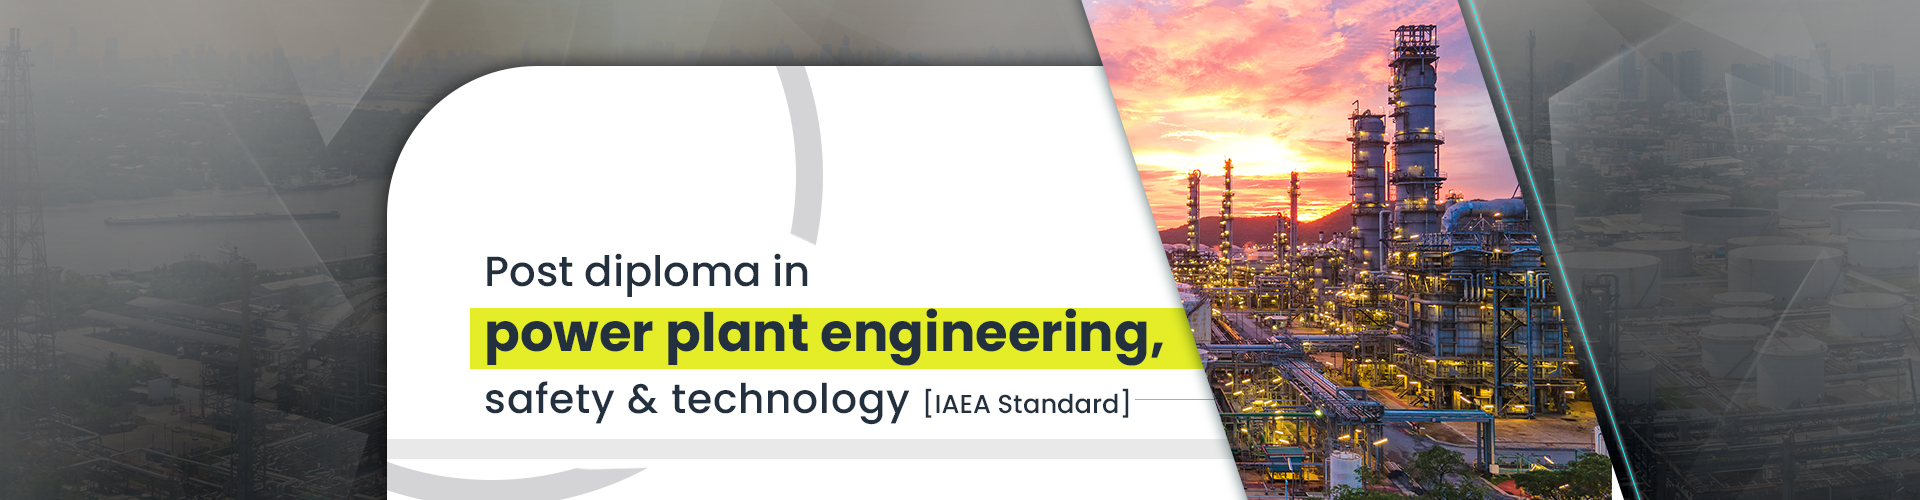 Post diploma in power plant engineering, safety & technology [IAEA Standard]